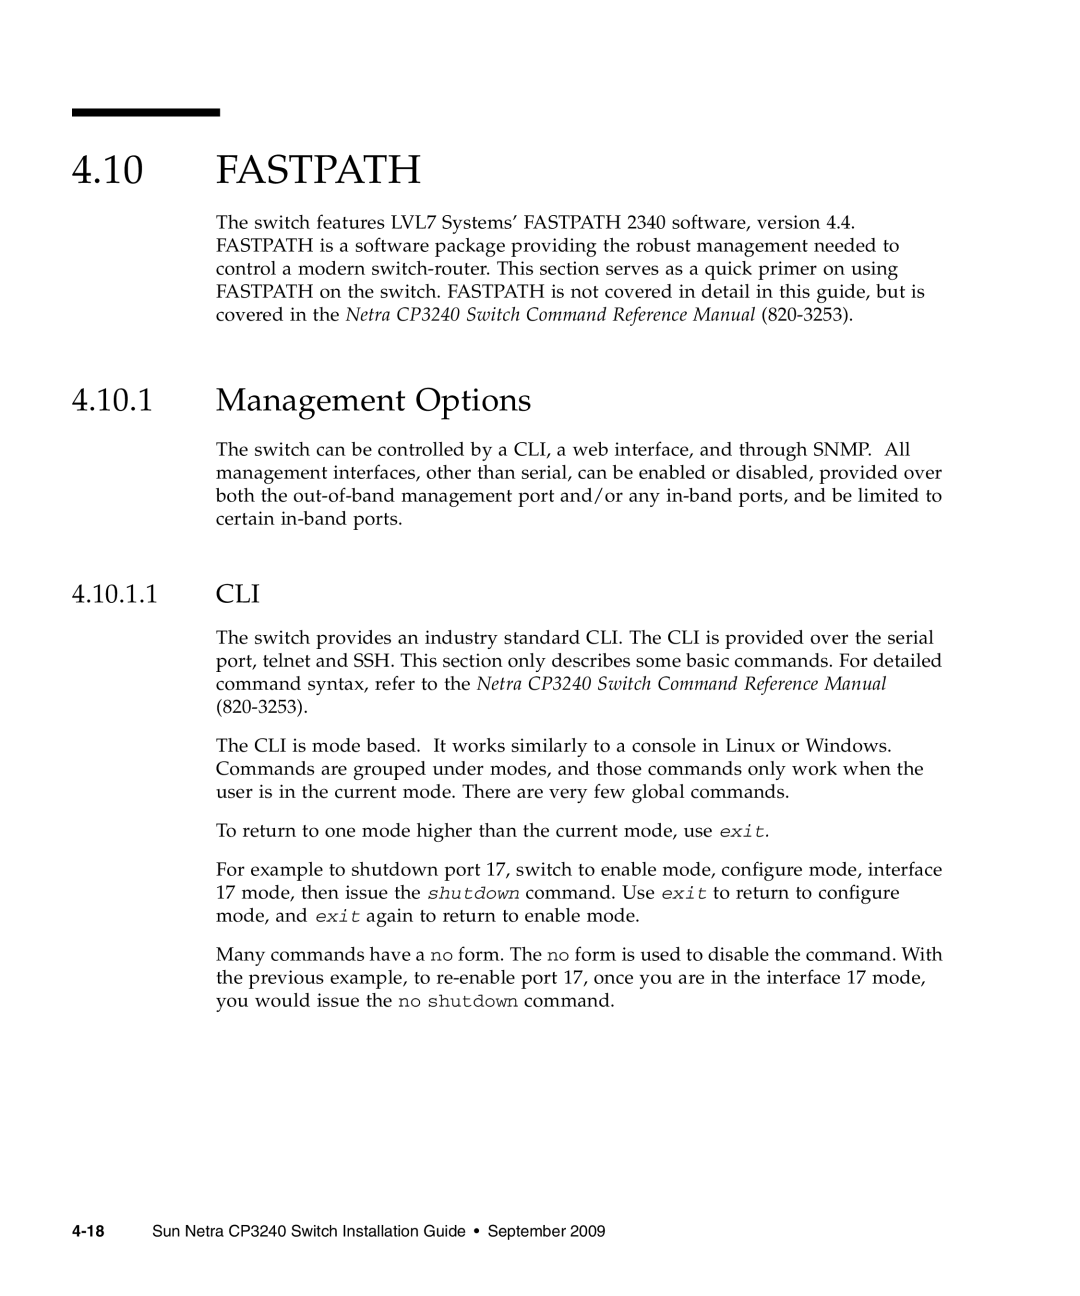 Sun Microsystems CP3240 manual Fastpath, Management Options, 4.10.1.1 CLI 